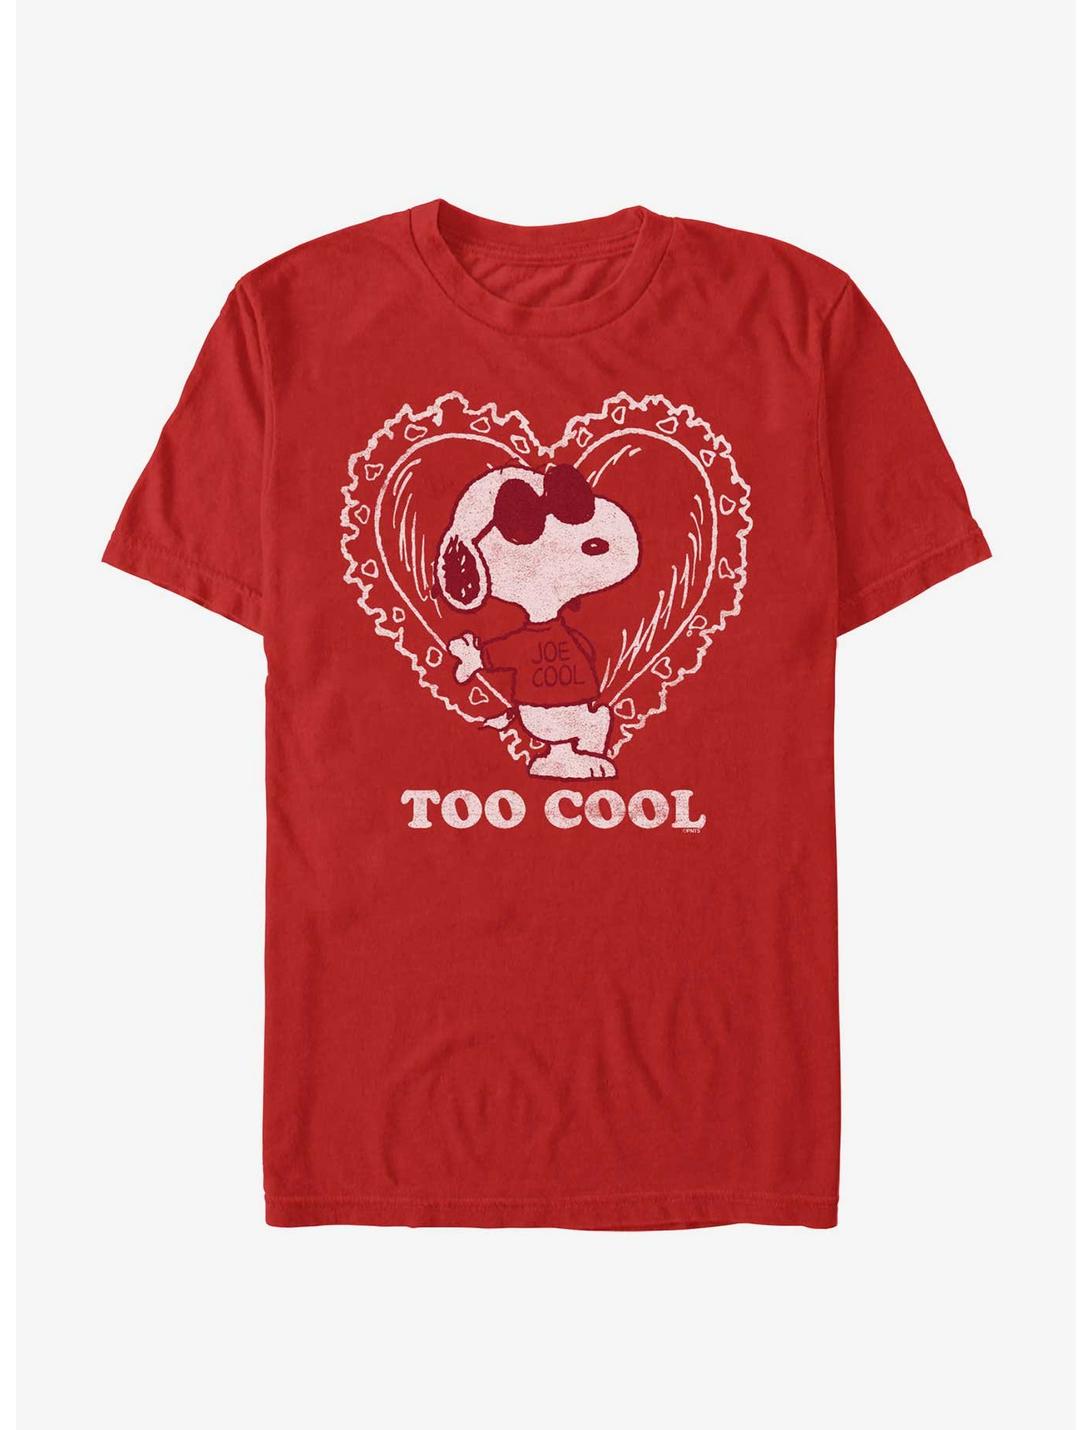 Peanuts Snoopy Too Cool Heart T-Shirt, RED, hi-res